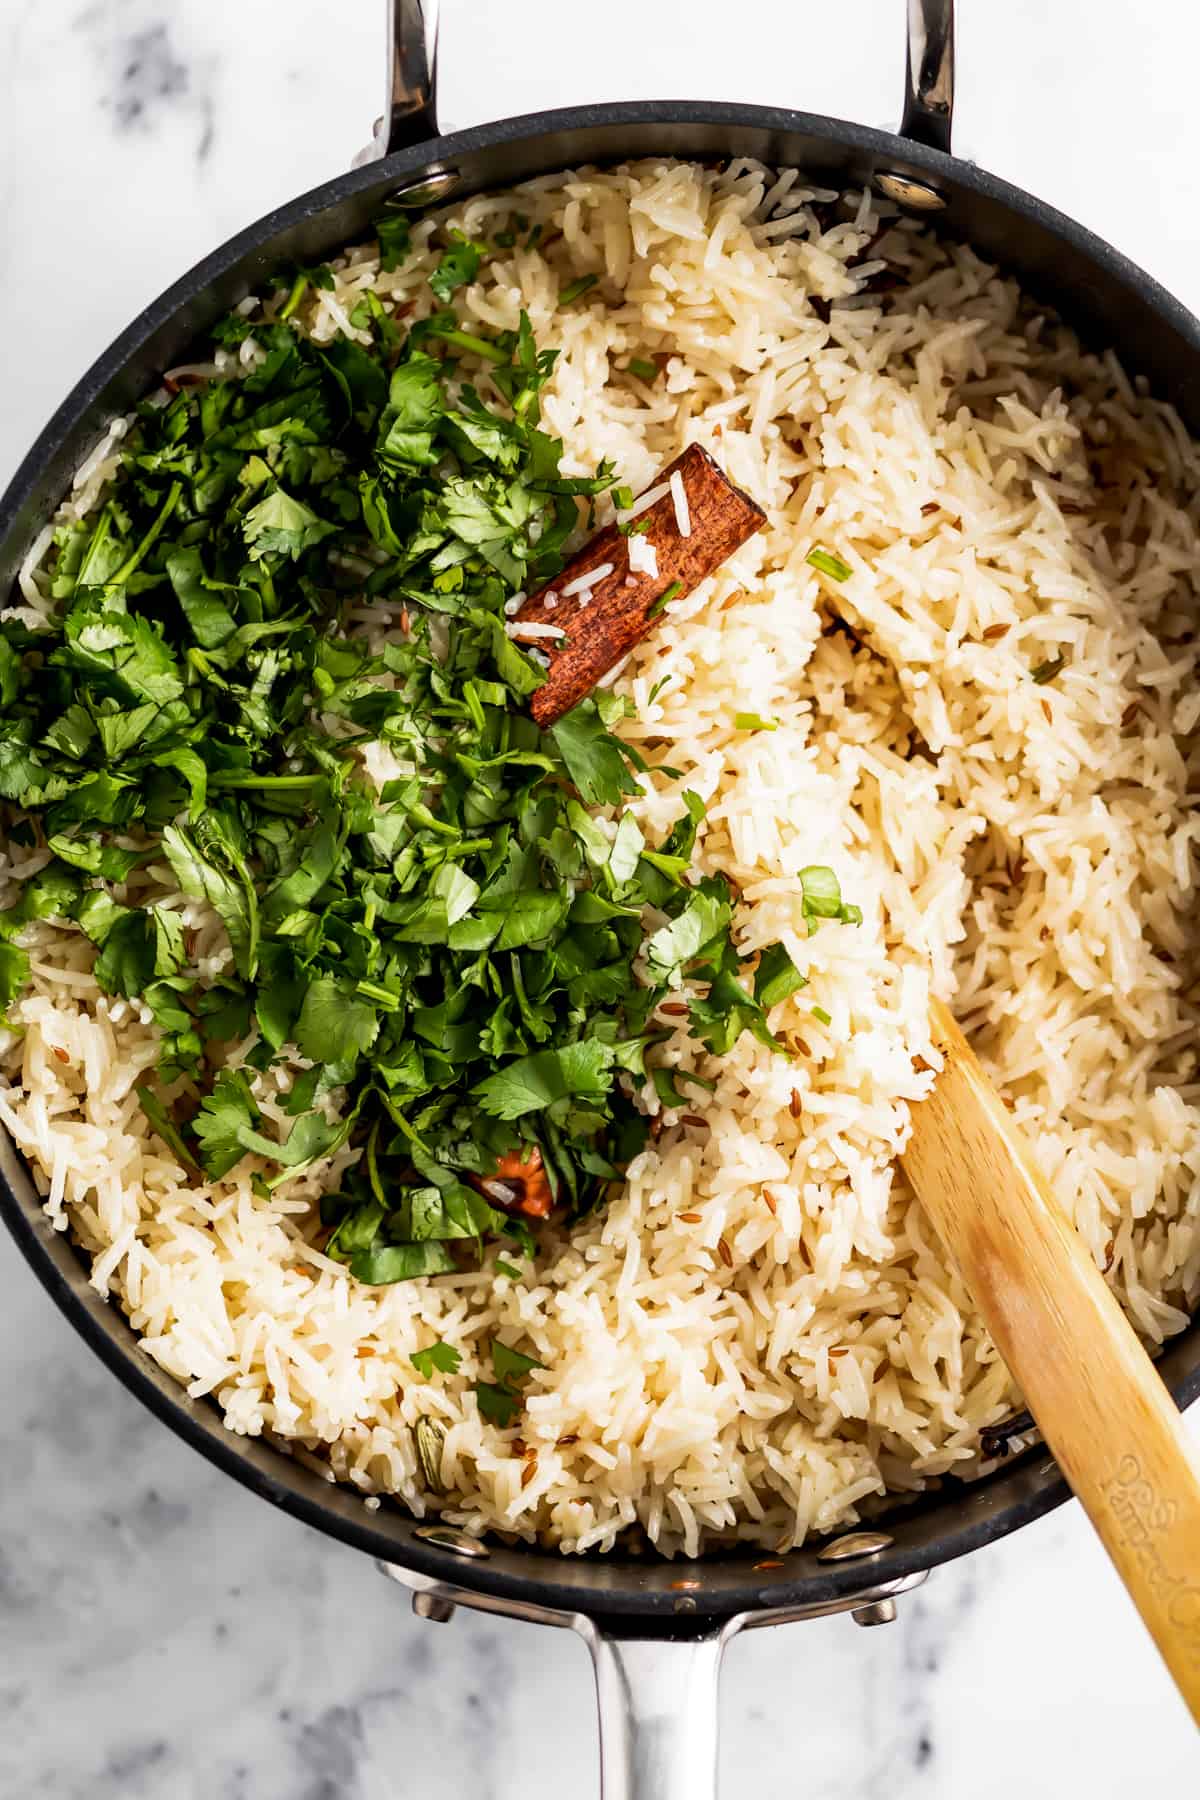 Adding fresh coriander to a skillet filled with rice.